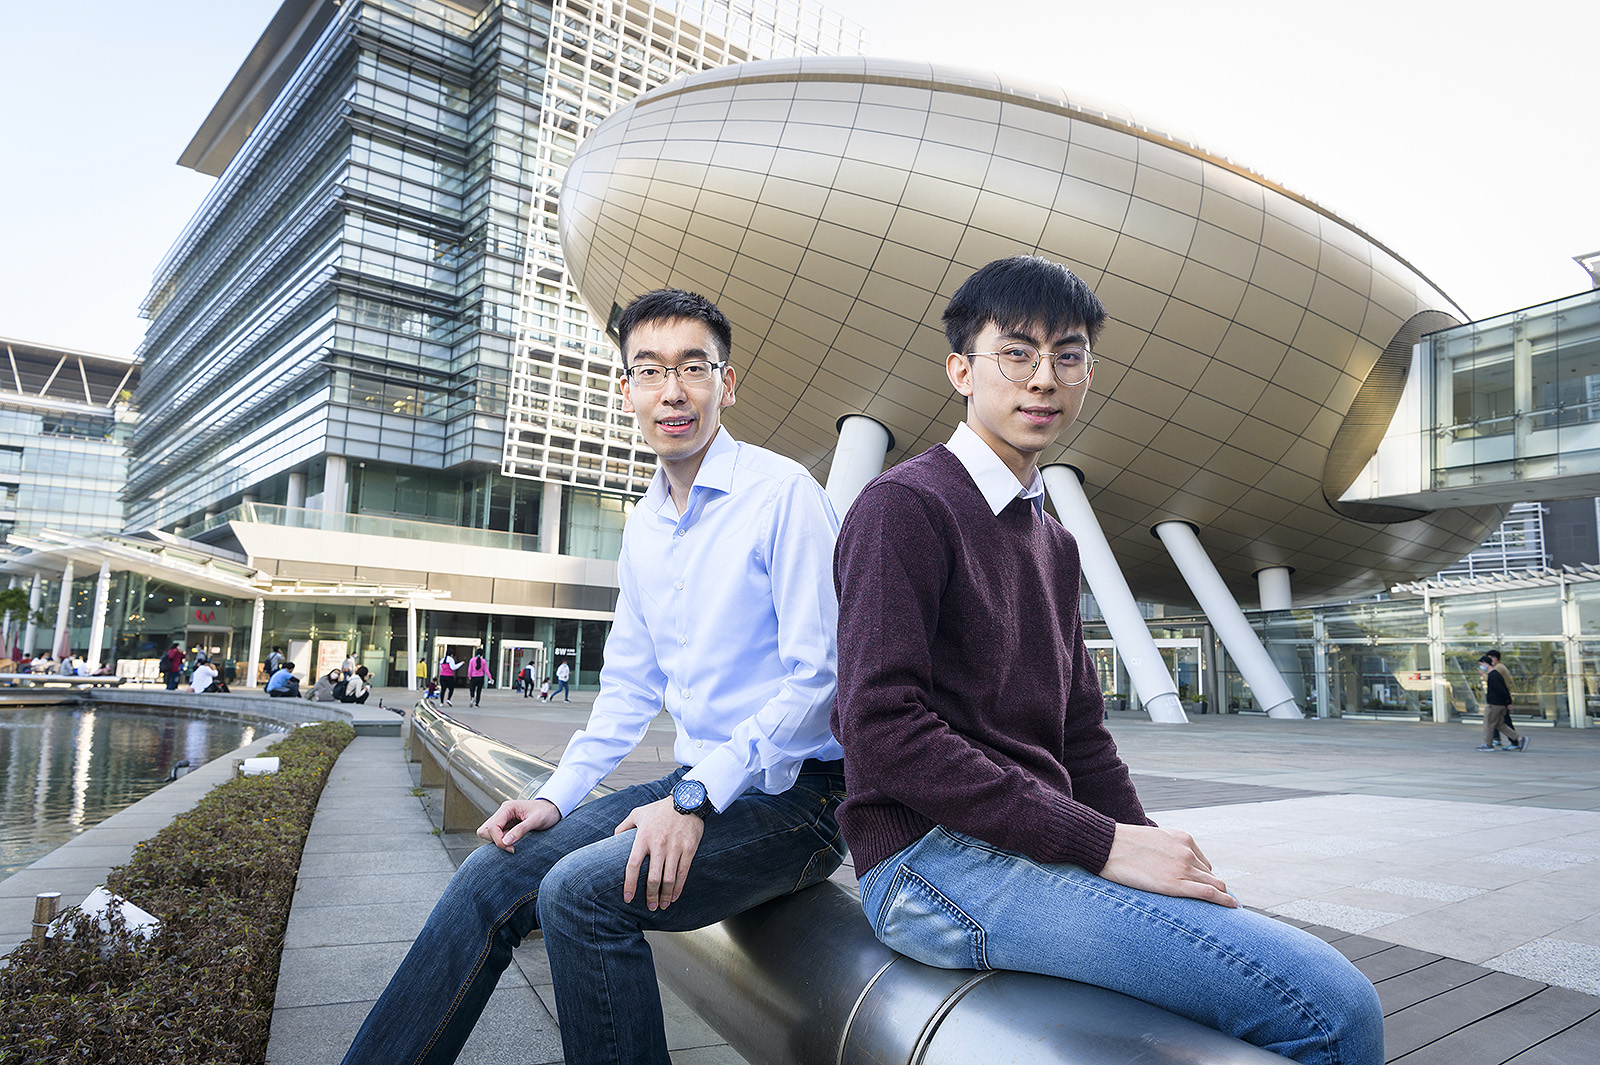 Dr Leung (left) and Mr Law (right) were selected for the HKSTP’s prestigious leadership programme.